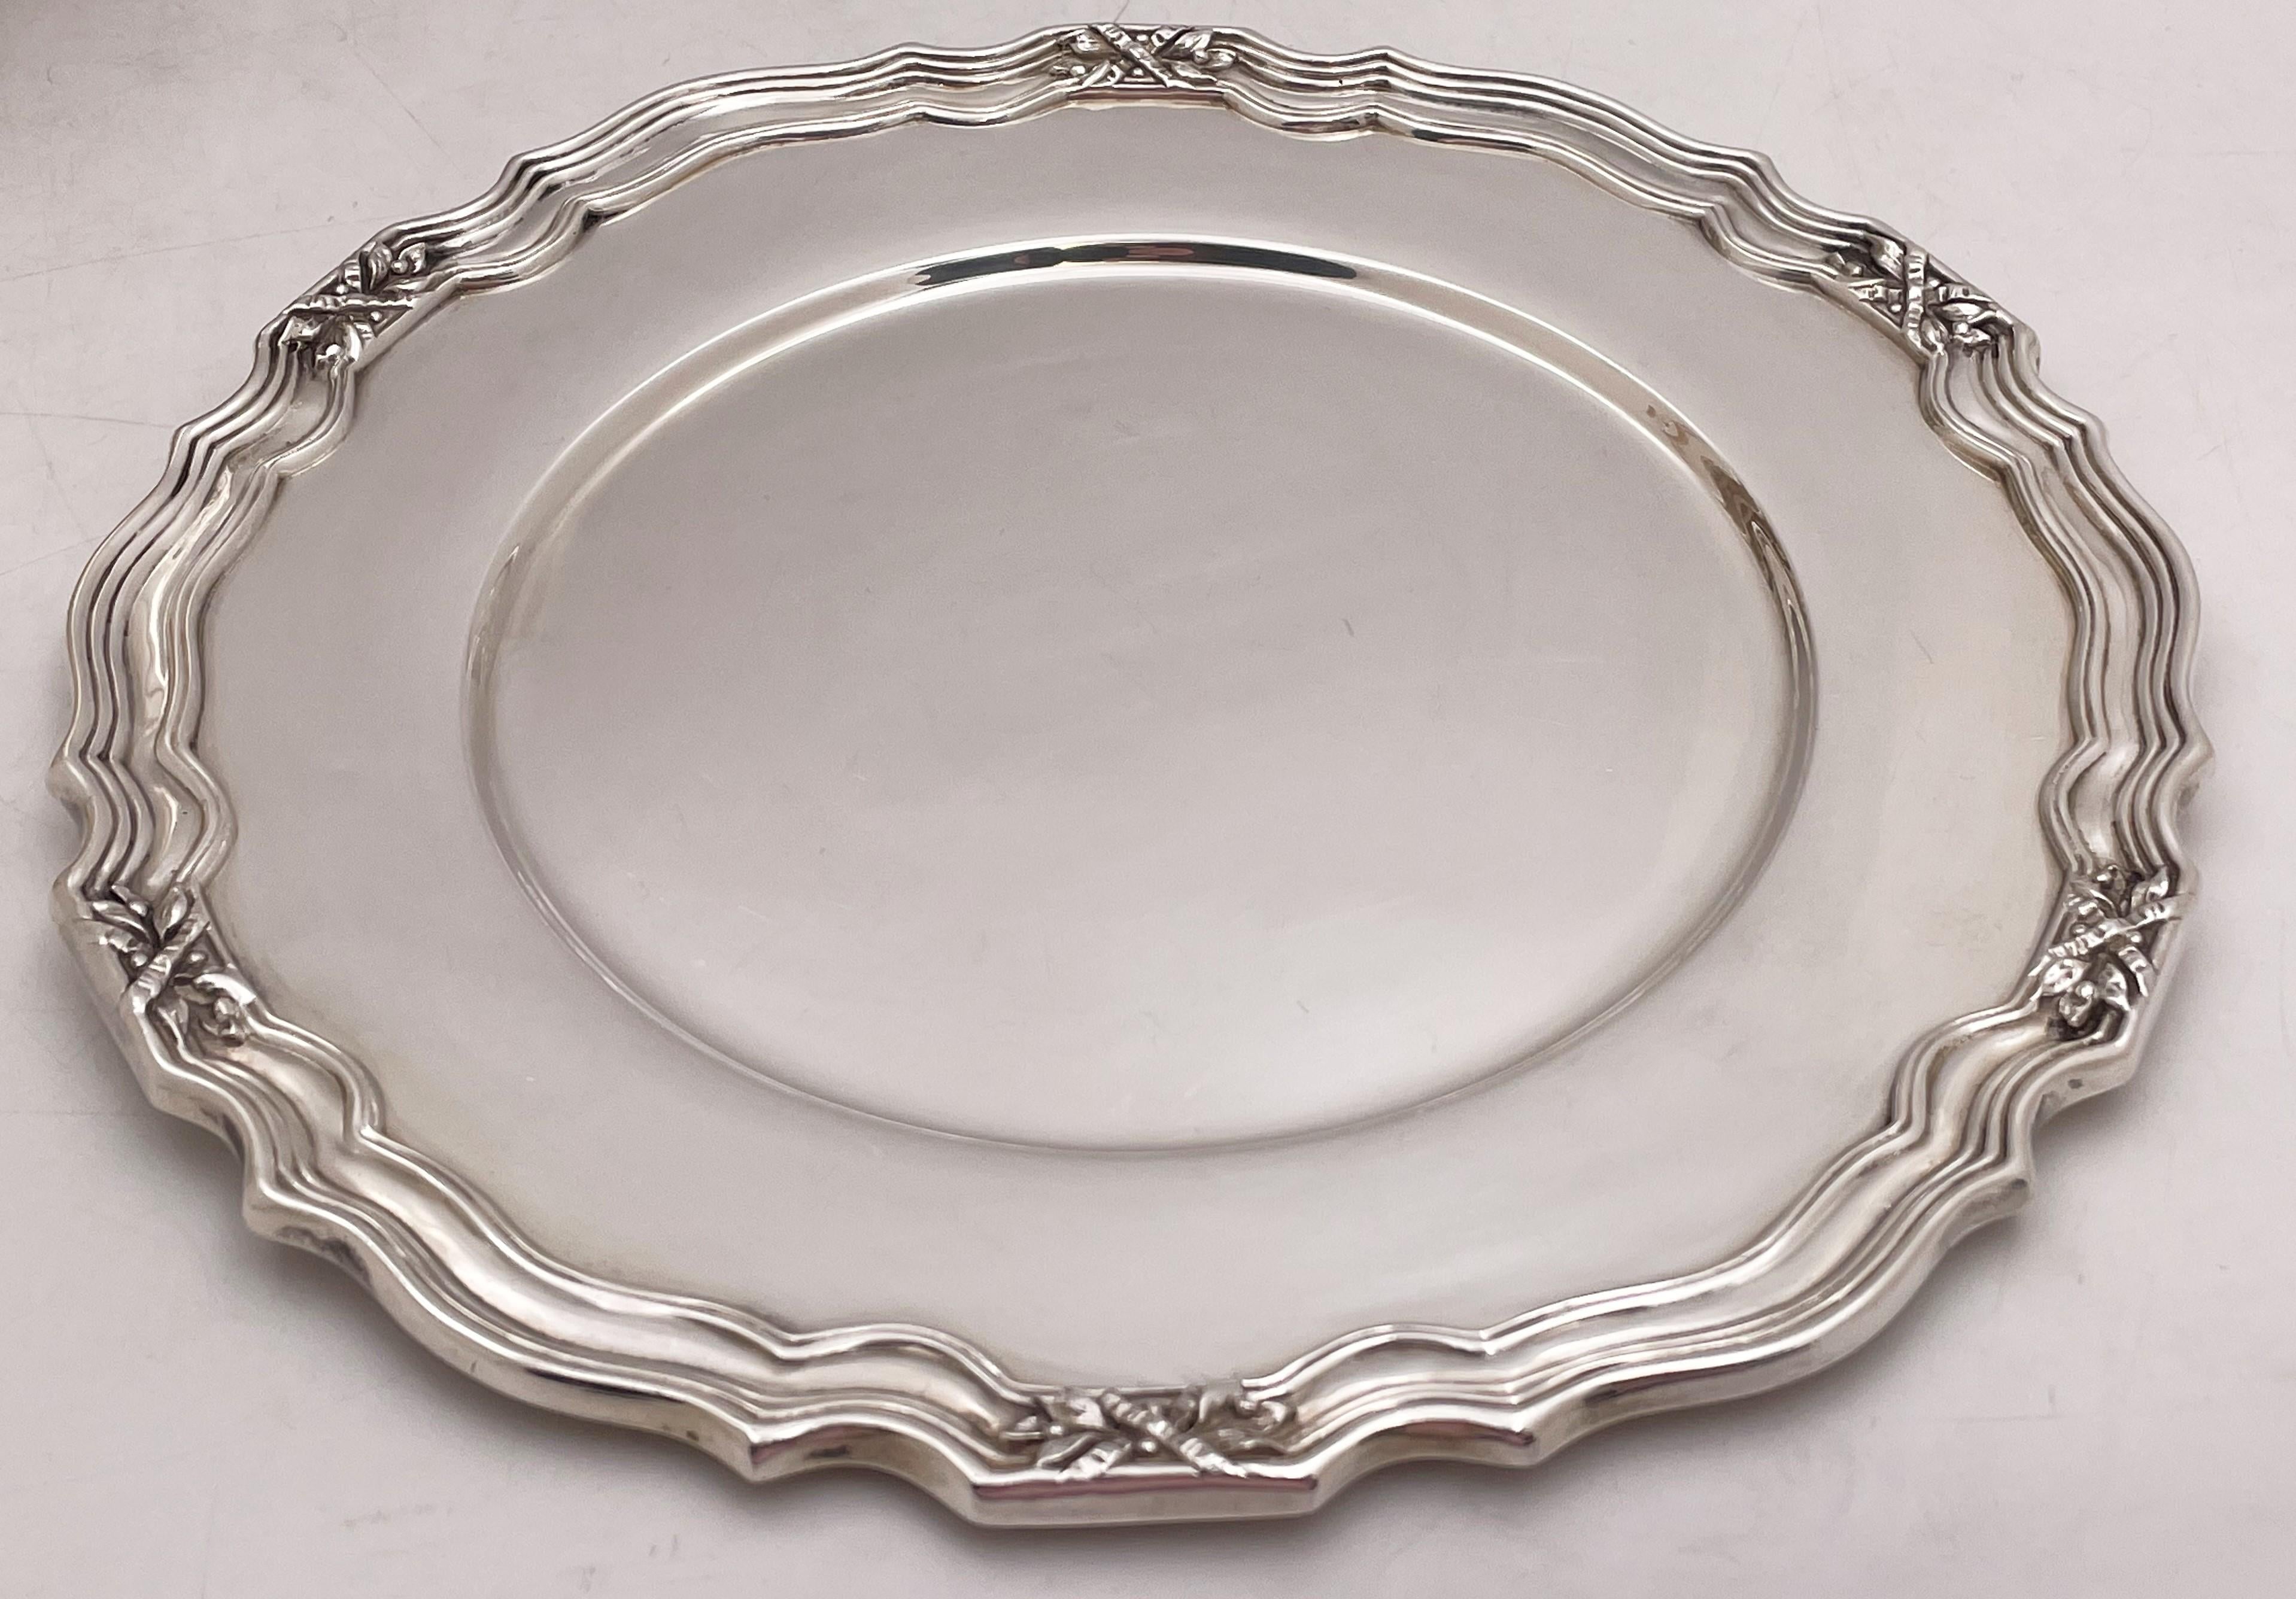 American Dominick & Haff 1907 Set of 12 Sterling Silver Dinner Plates/ Chargers For Sale